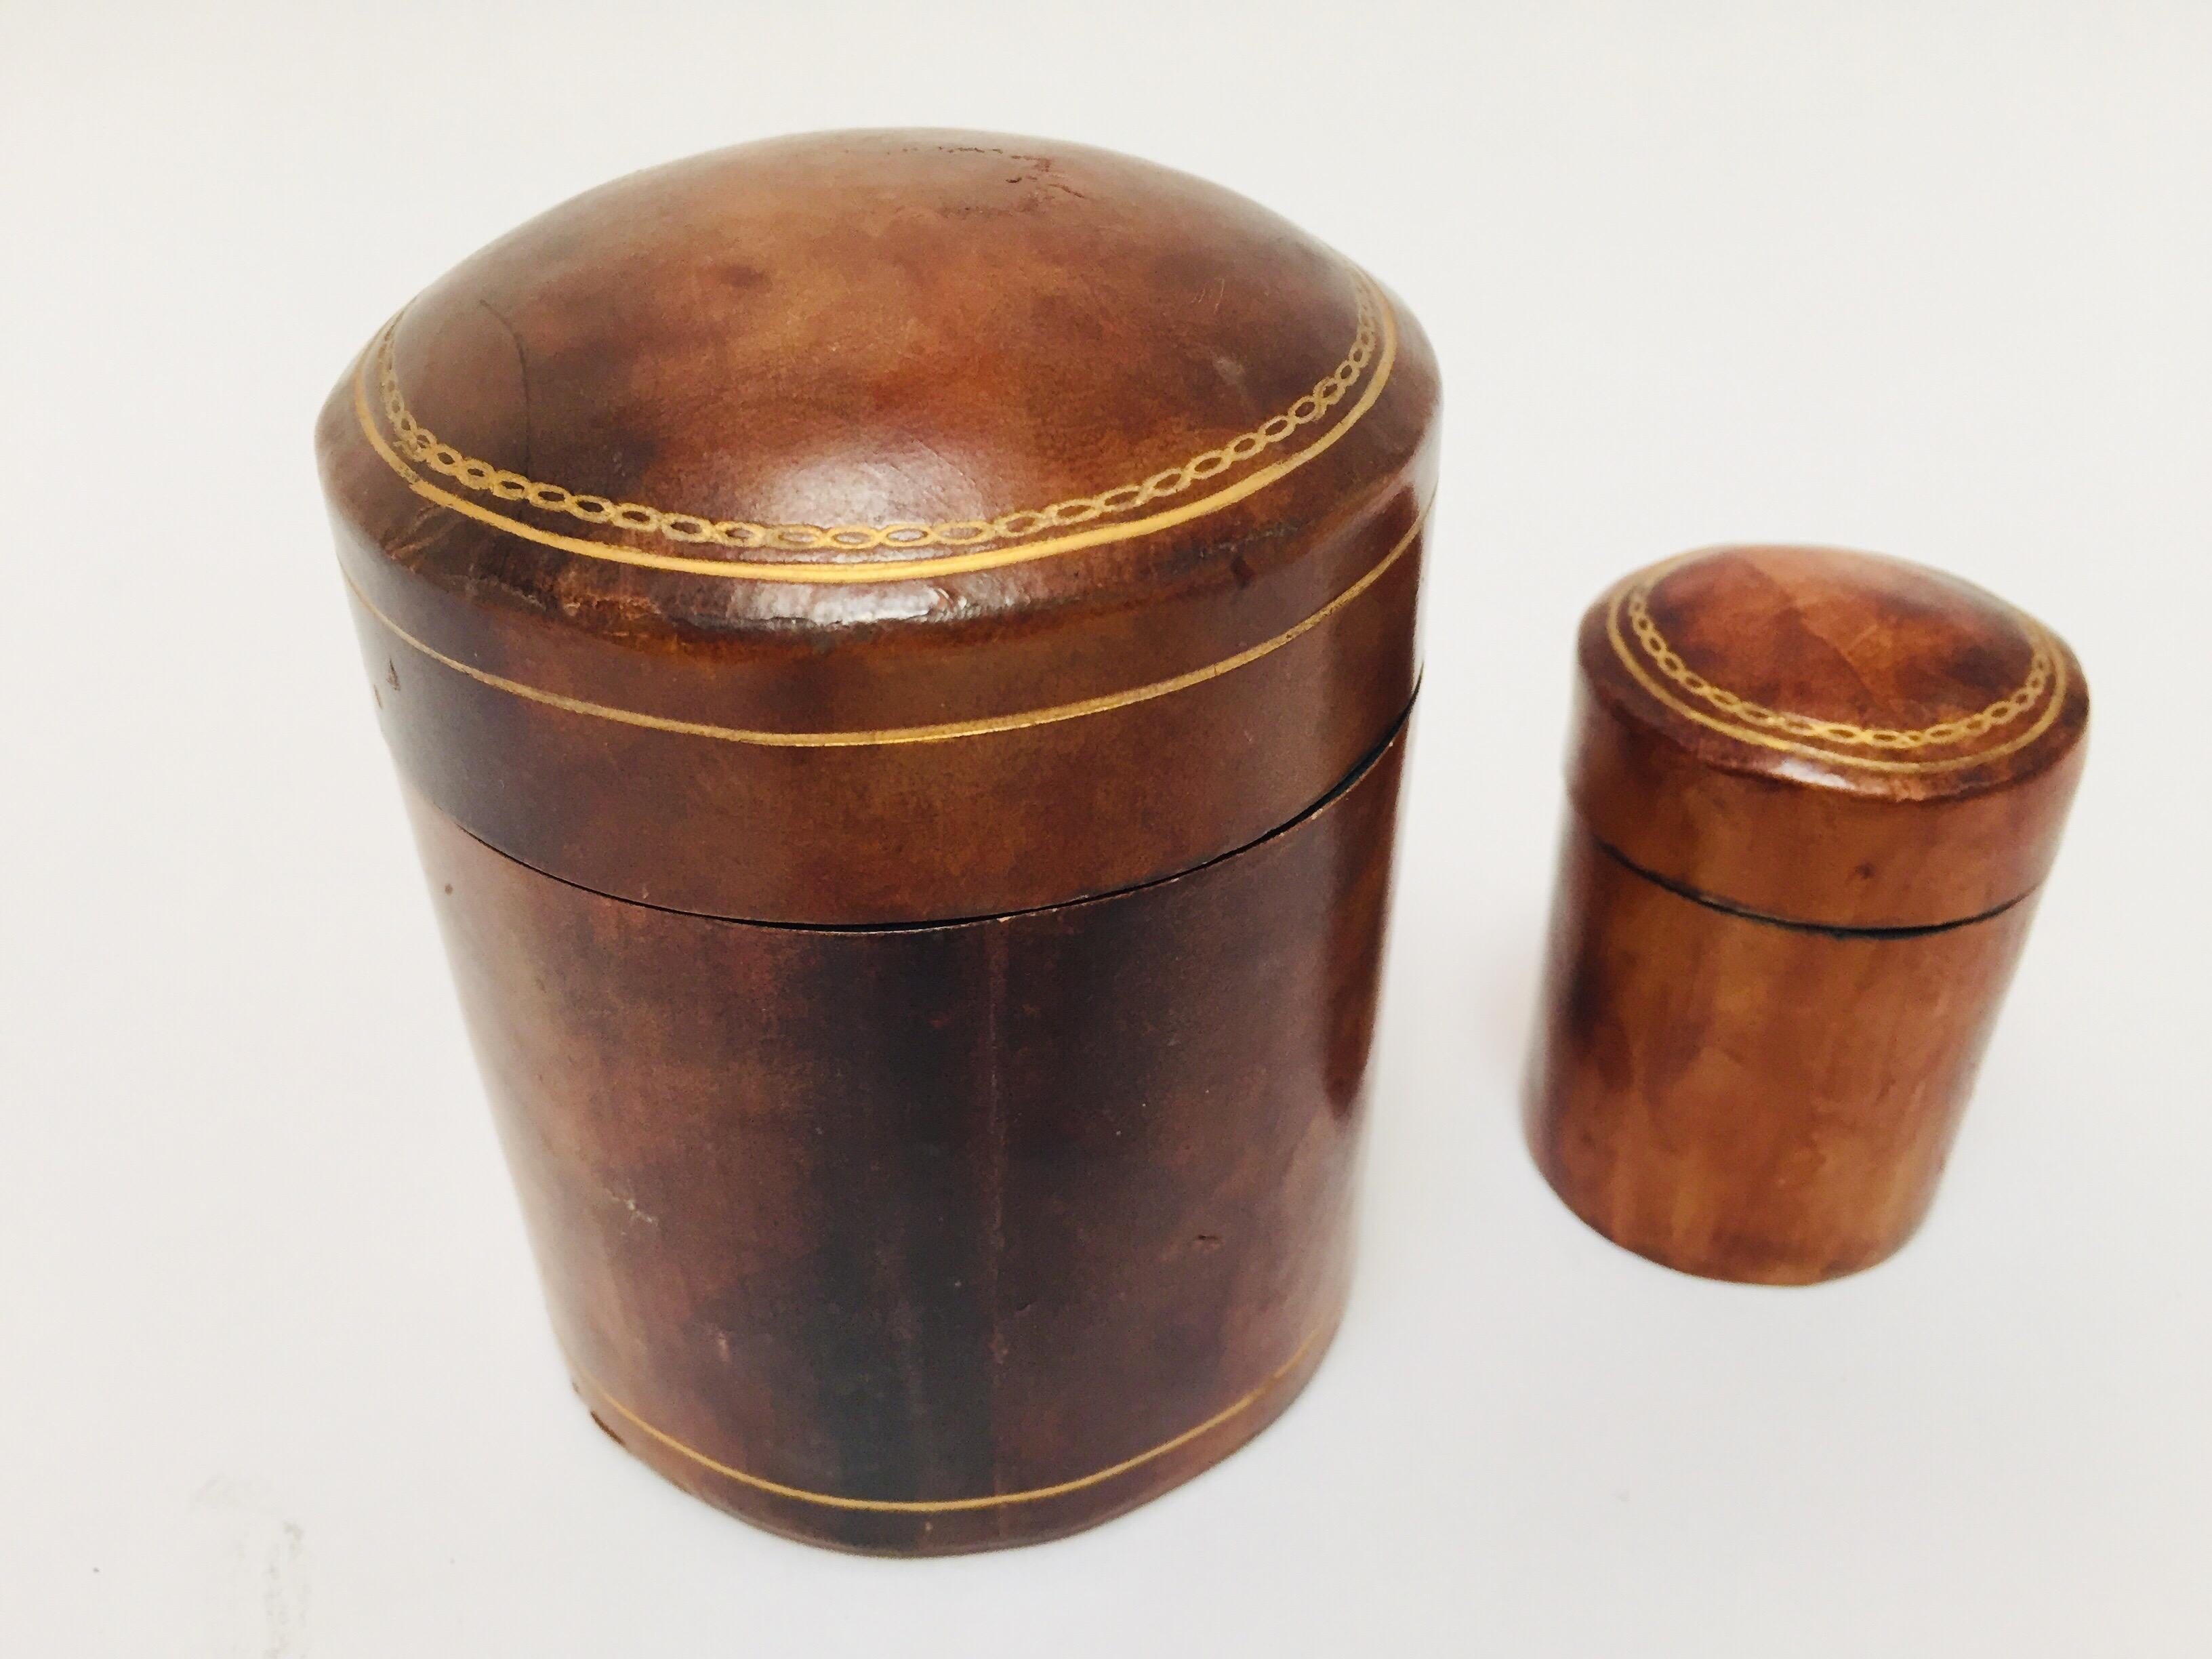 Set of two vintage Florentine leather snuff boxes with gilt decoration.
Vintage leather covered set of two tobacco lidded boxes.
Used them for tobacco or snuff decorative boxes.
Nicely patinated boxes with tooled gilded decoration
Measures: